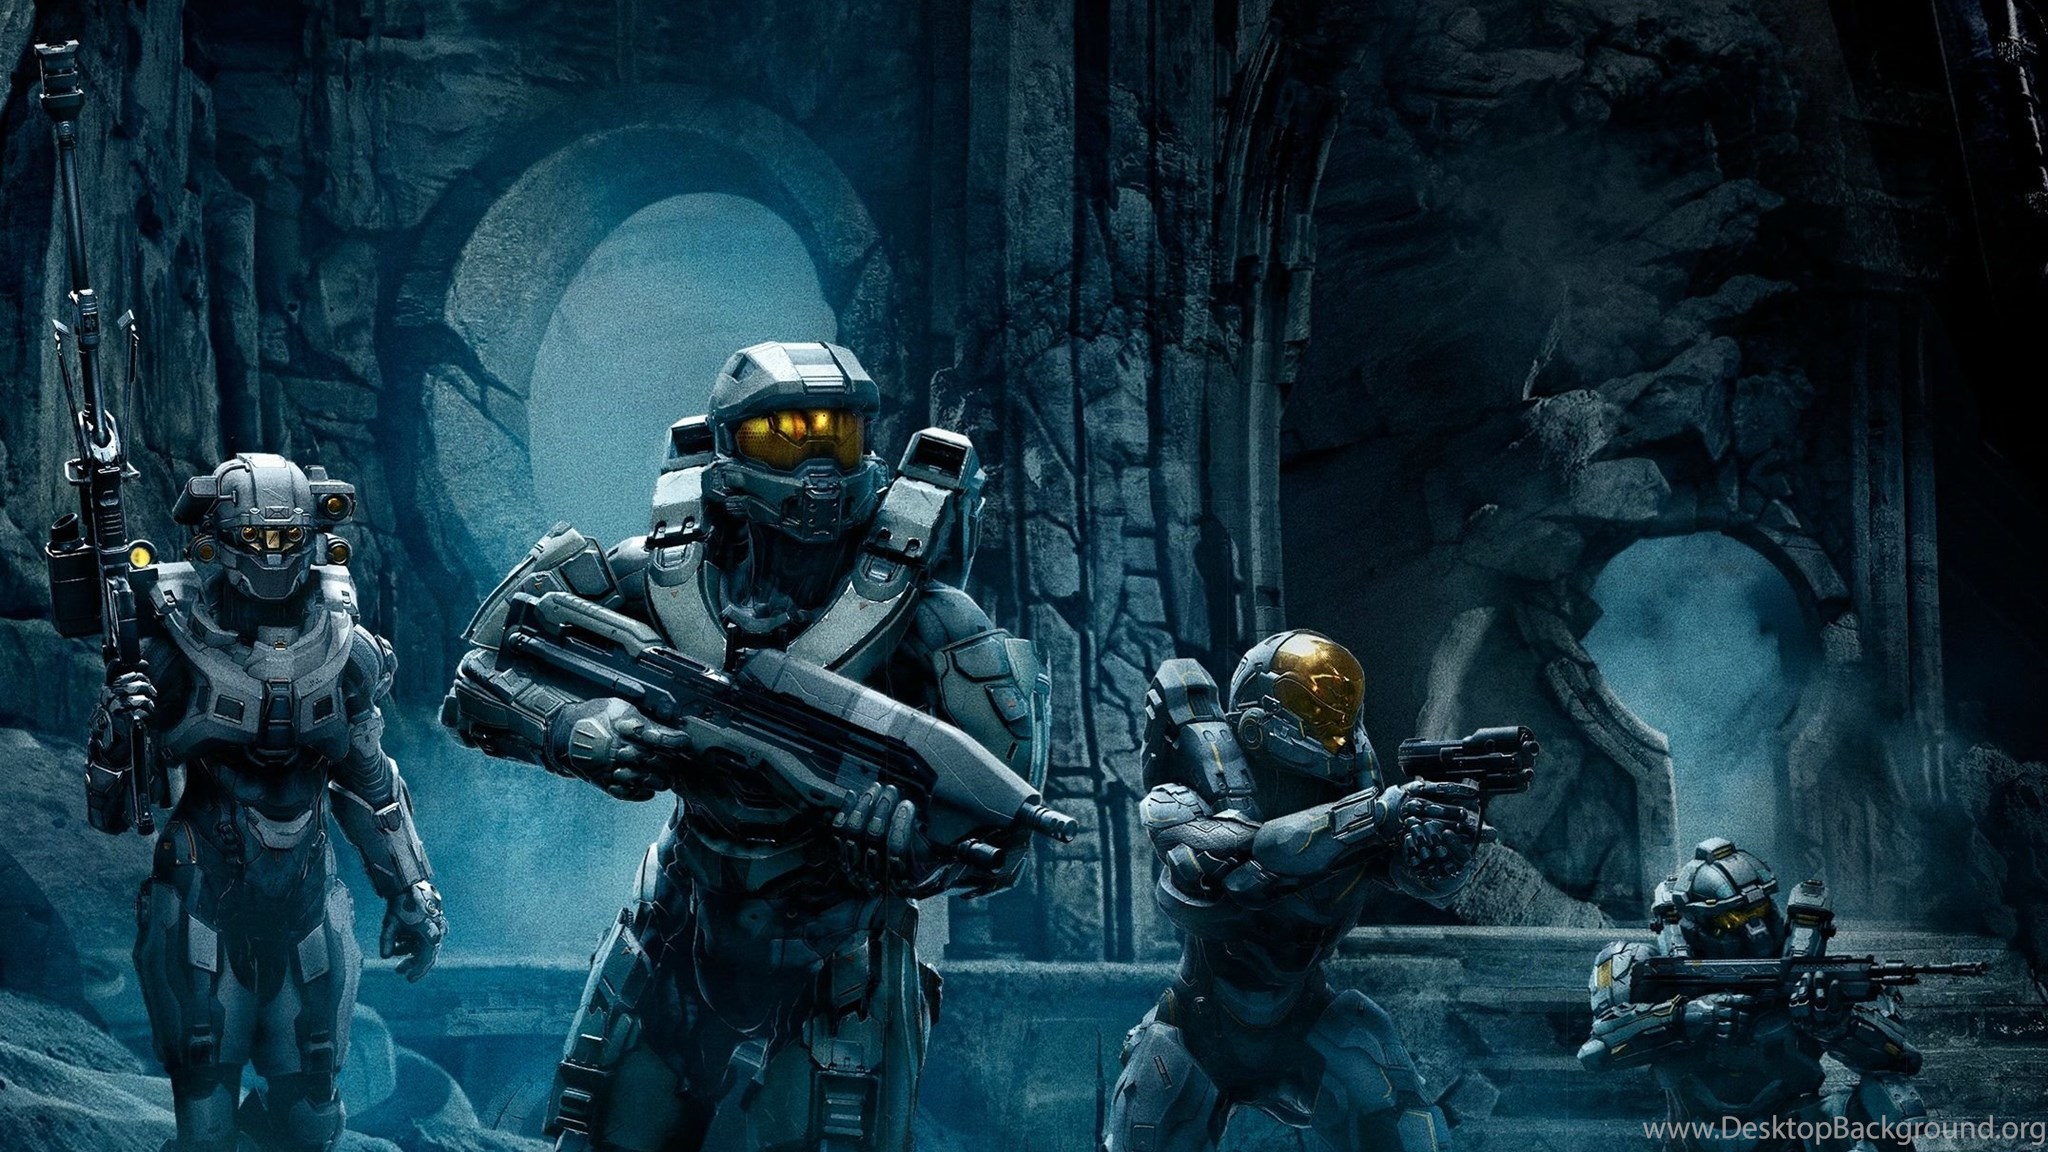 Download HQ Wallpapers Of BLUE TEAM : Halo Widescreen Dual Screen Wide 2048...